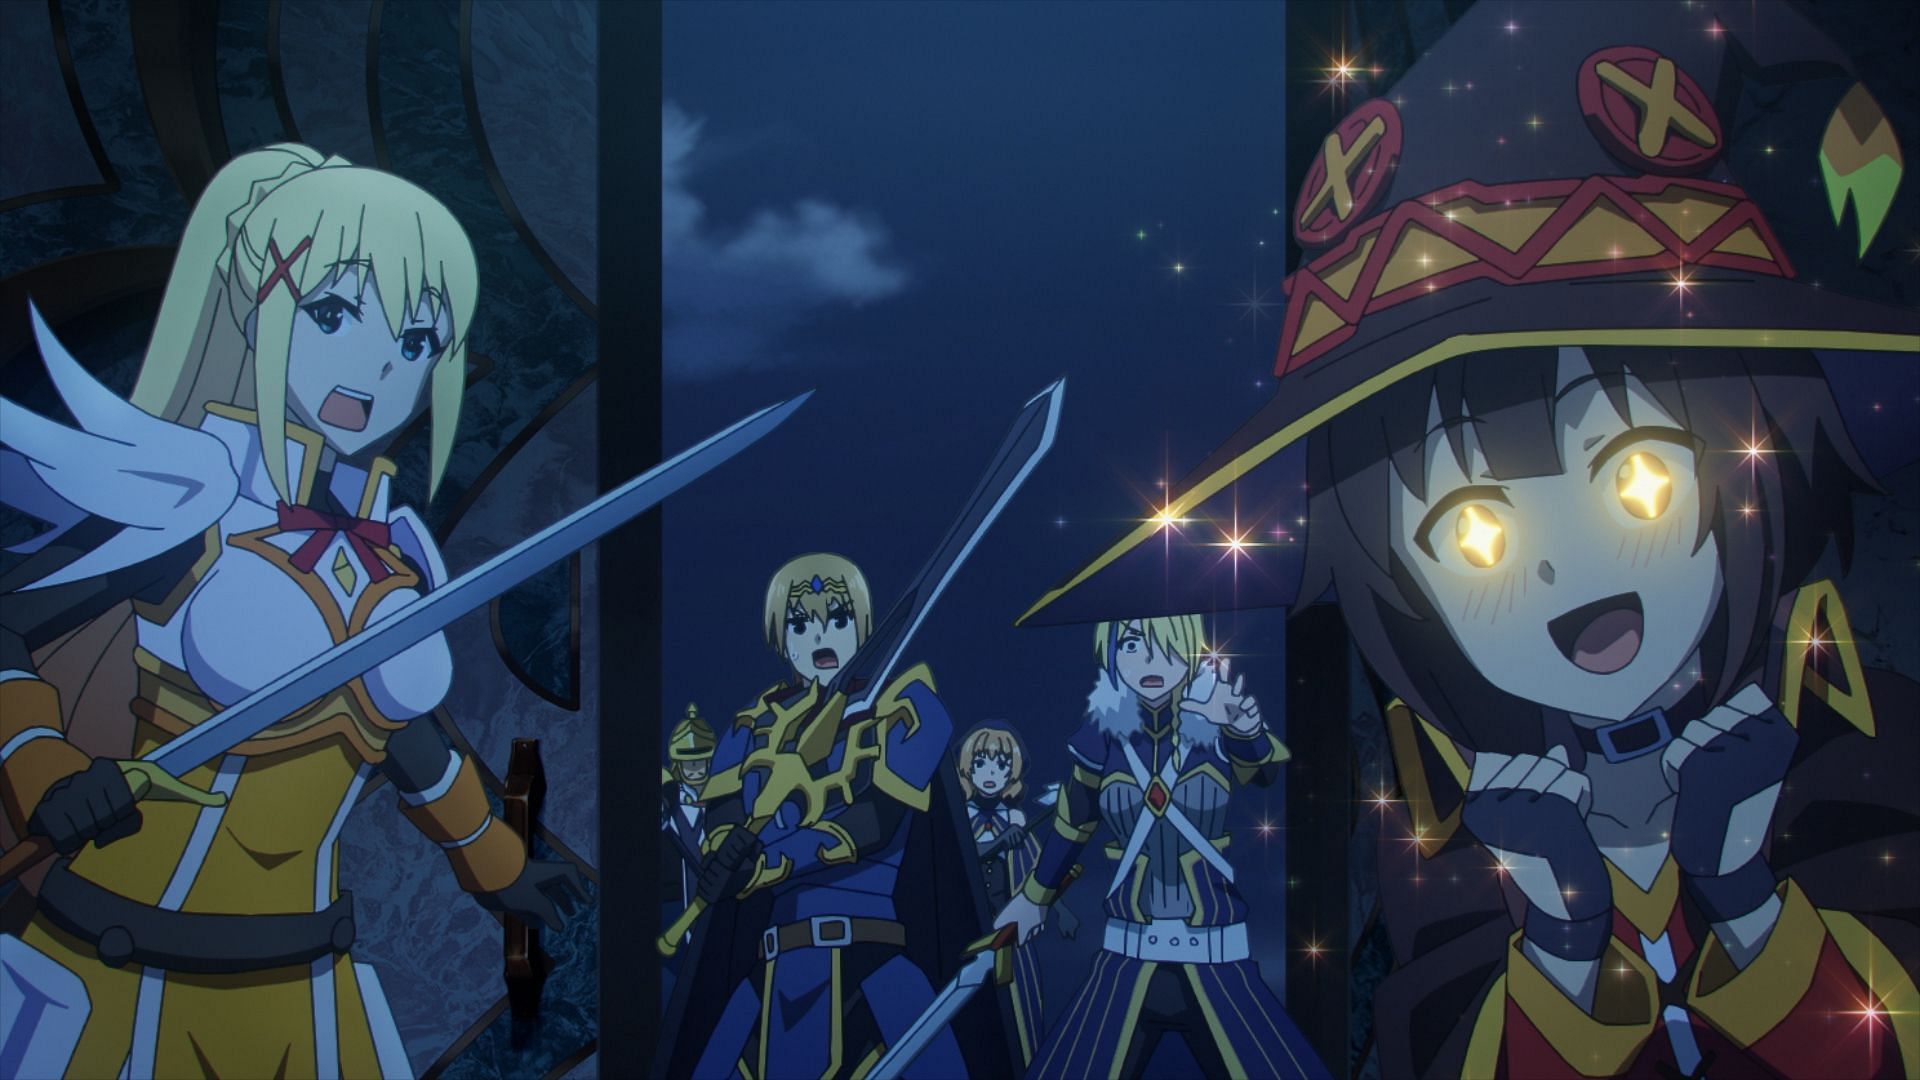 Megumin, Darkness, and Claire as seen in anime series (Image via Drive)